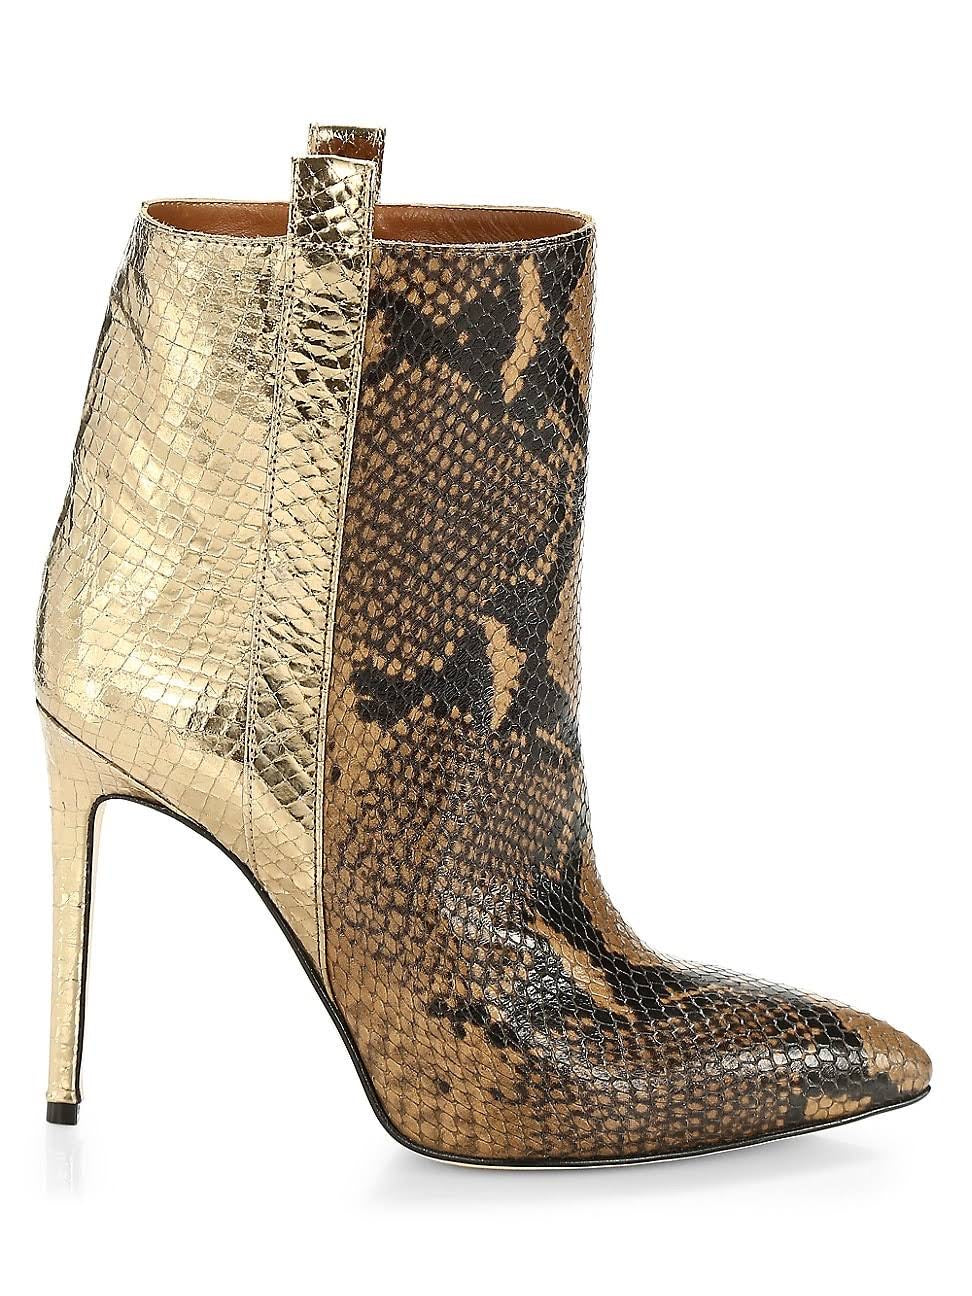 PARIS TEXAS brown snake skin ankle boots